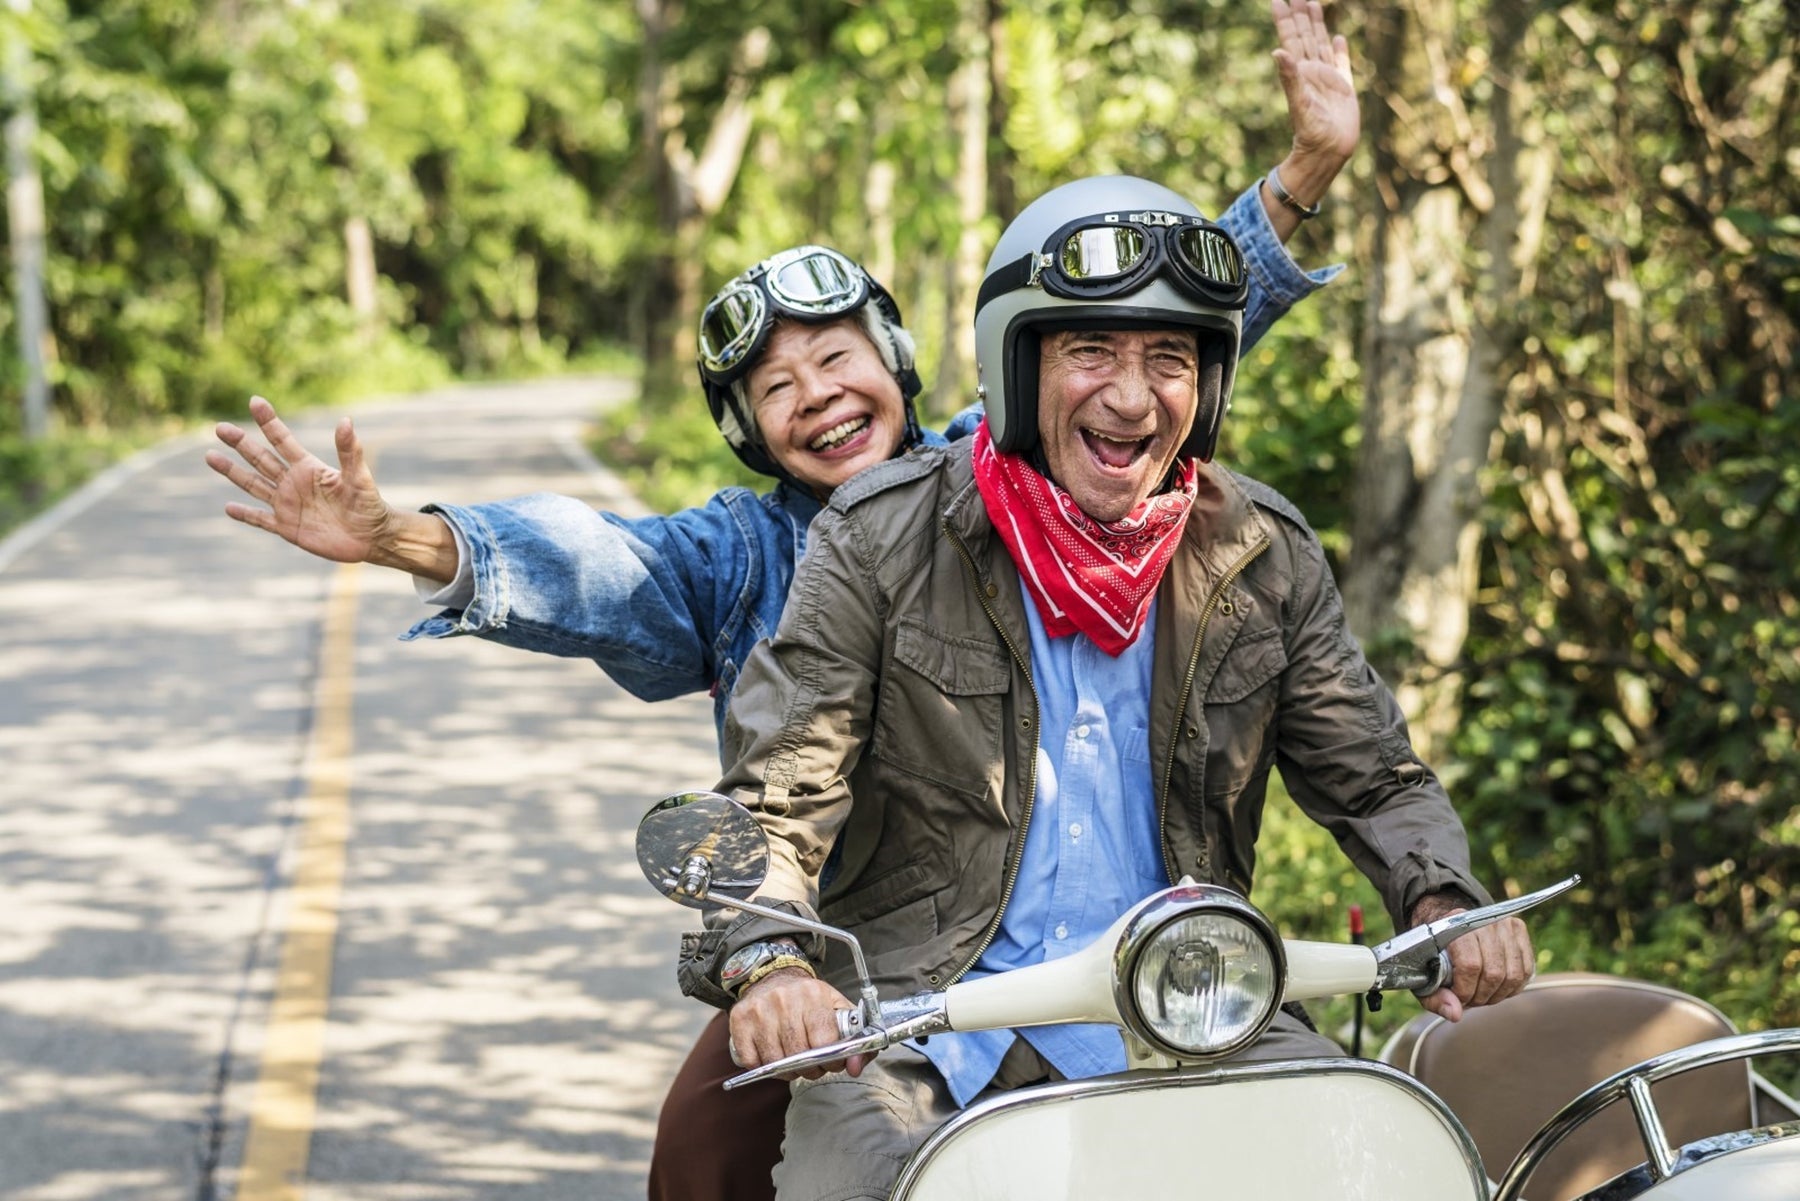 An older couple smiling riding a moped scooter together down a tree-filled street